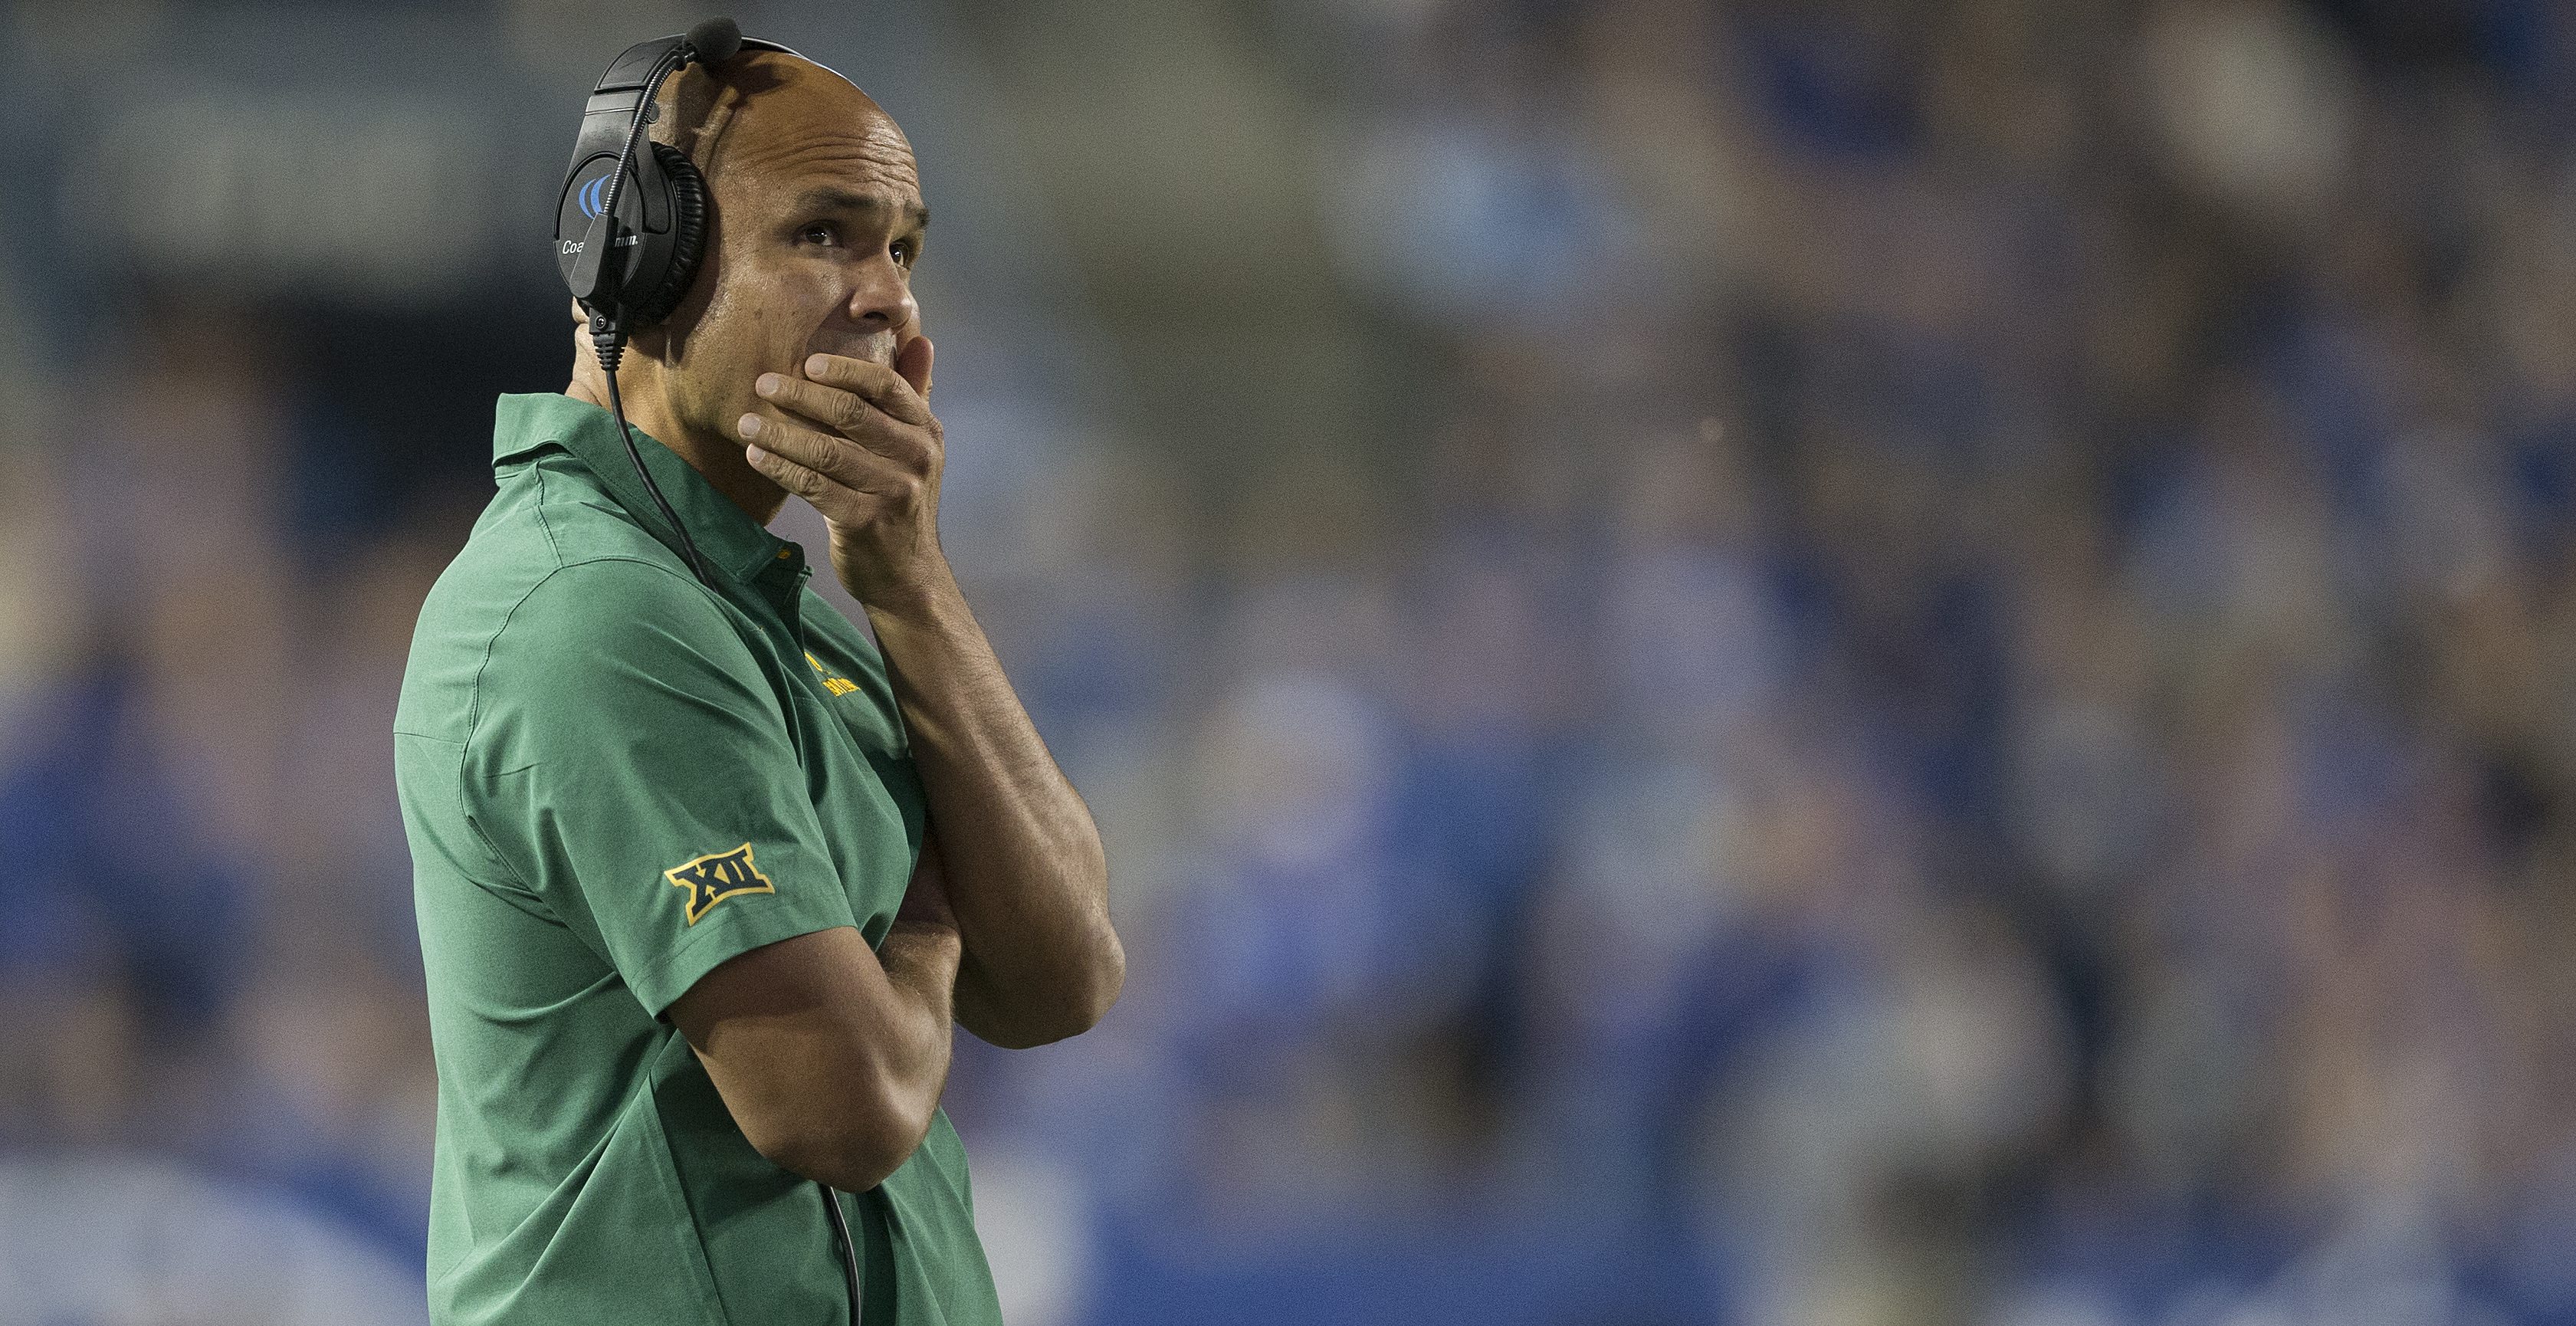 PROVO, UT- SEPTEMBER 10: Head coach Dave Aranda of the Baylor Bears reacts during the second half of the game against the Brigham Young Cougars at LaVell Edwards Stadium on September 10, 2022 in Provo, Utah.